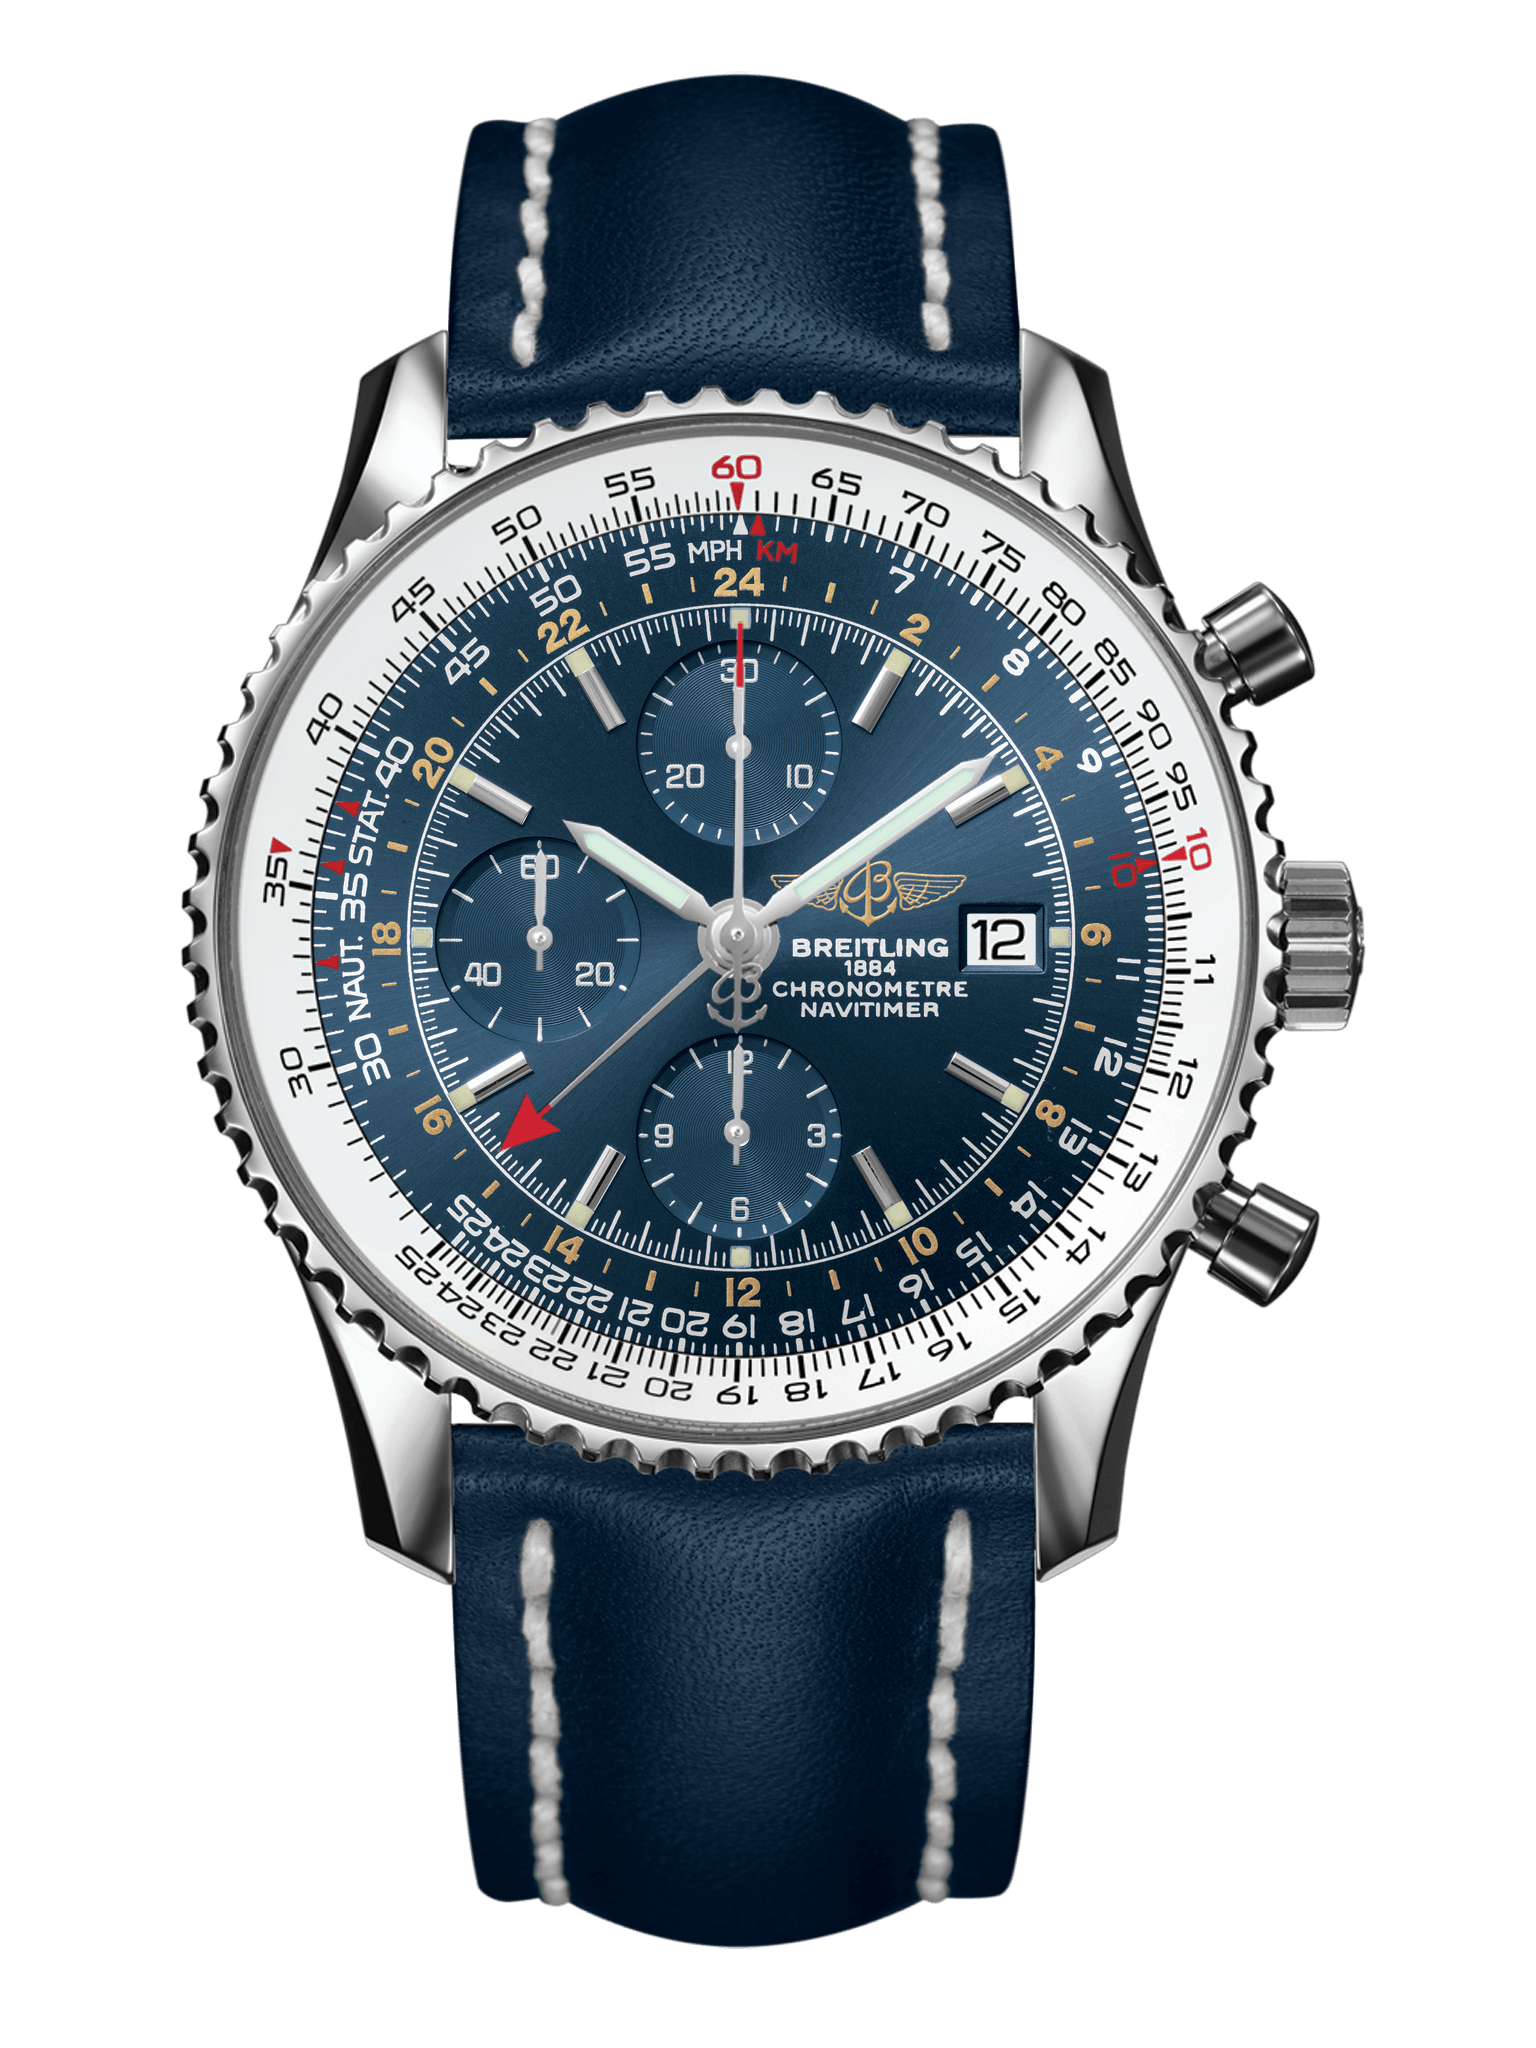 Breitling Avengers II Timer Black Dial Watch A13381 cardbreitling Avengers II chronographic table Starr A13381